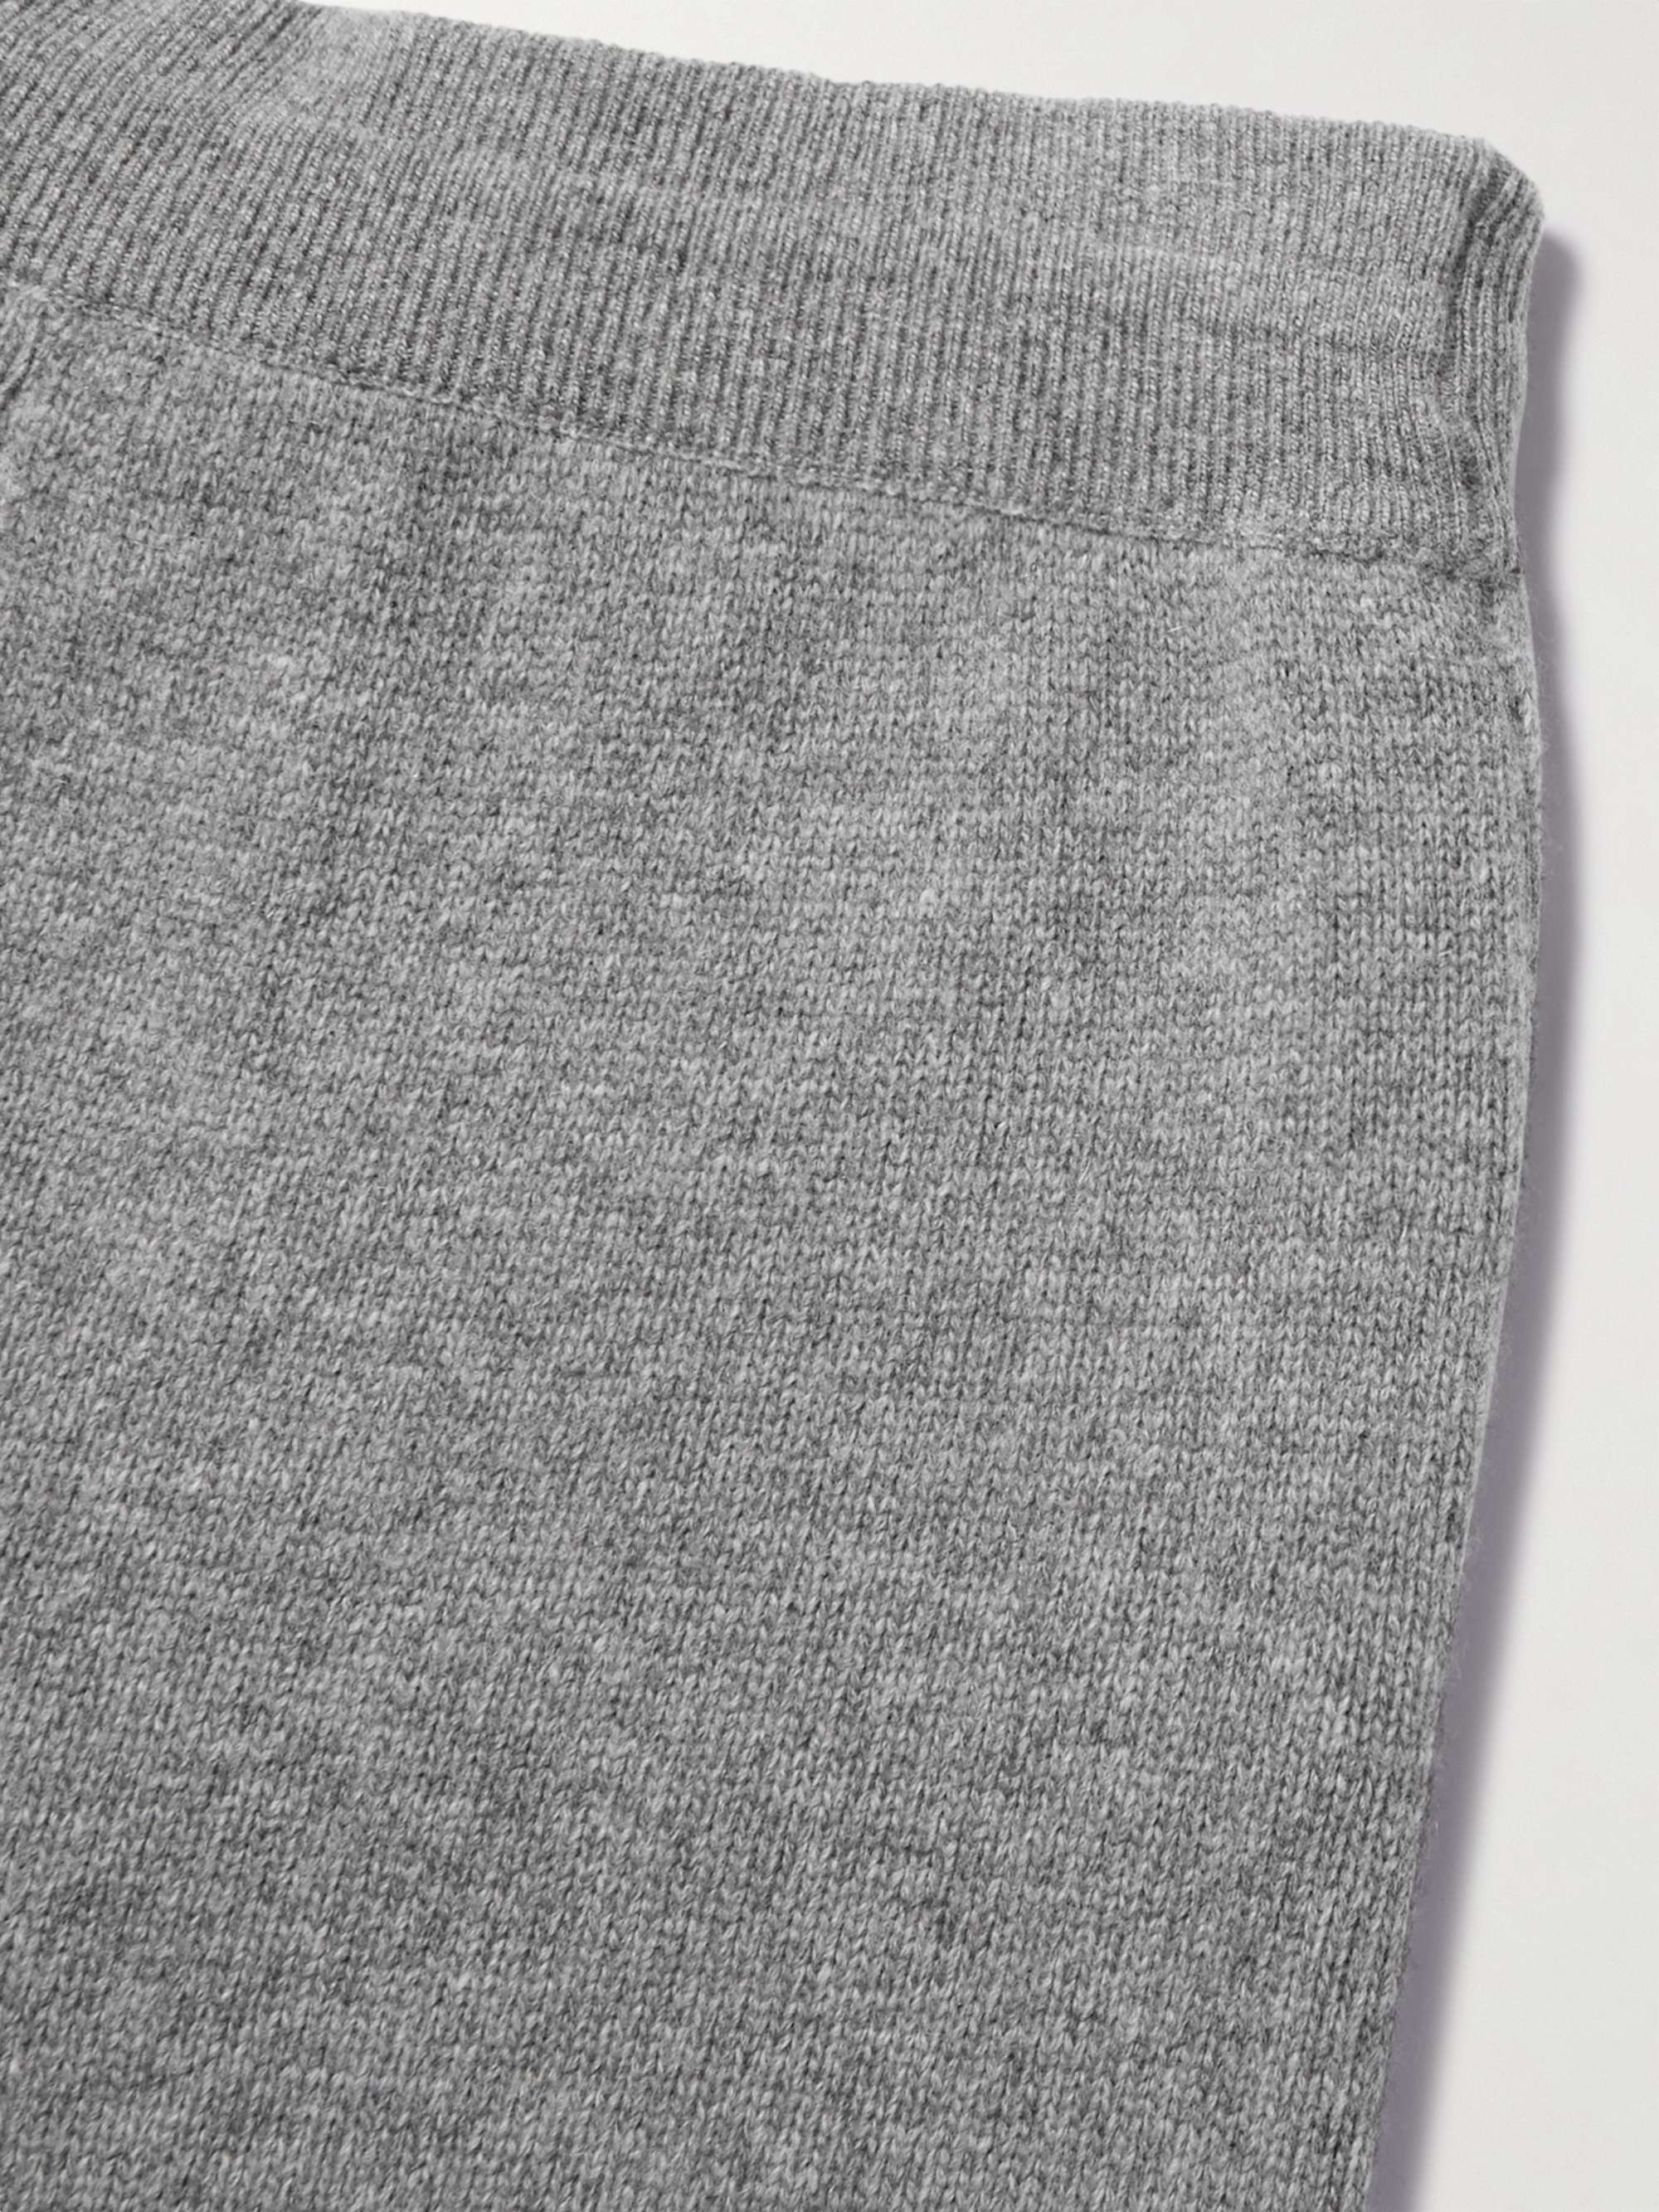 CELINE HOMME Wool and Cashmere-Blend Sweatpants